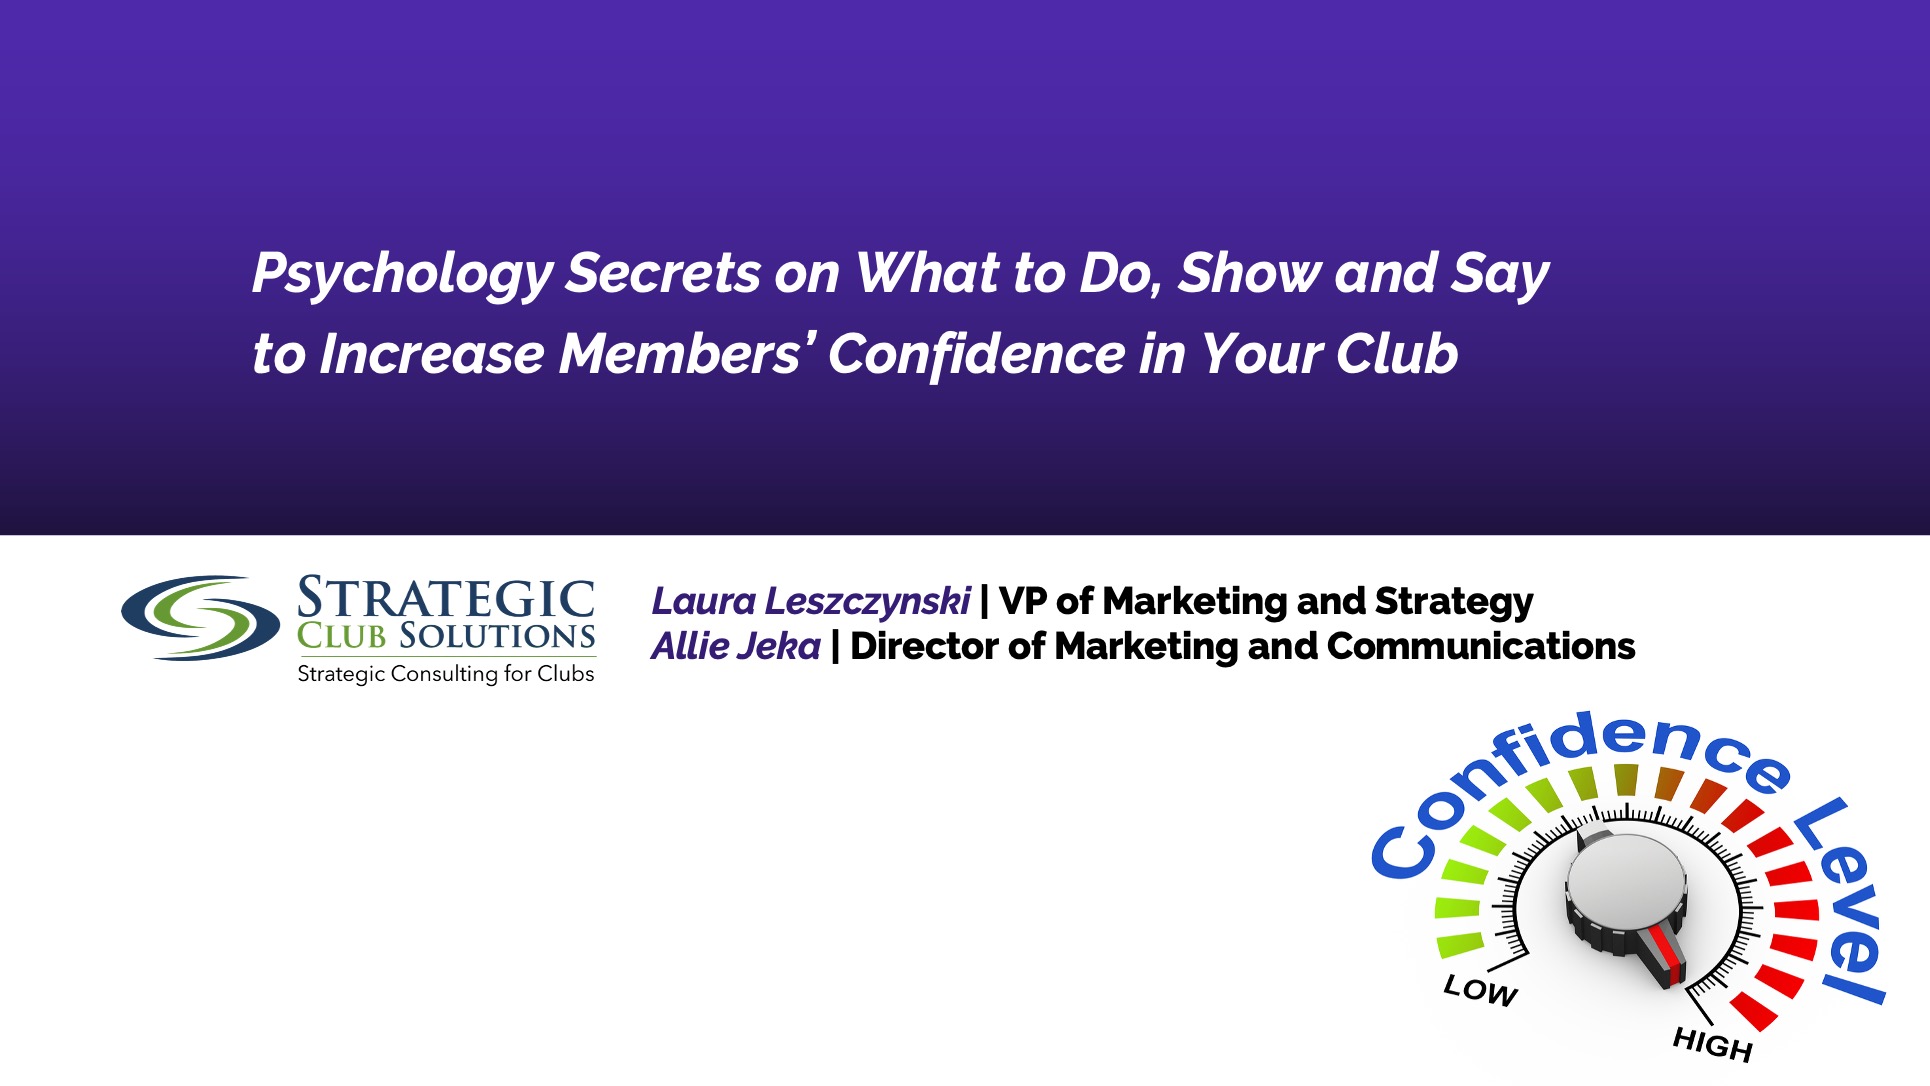 Psychology secrets on What to Do, show and say to increase members' confidence in your club